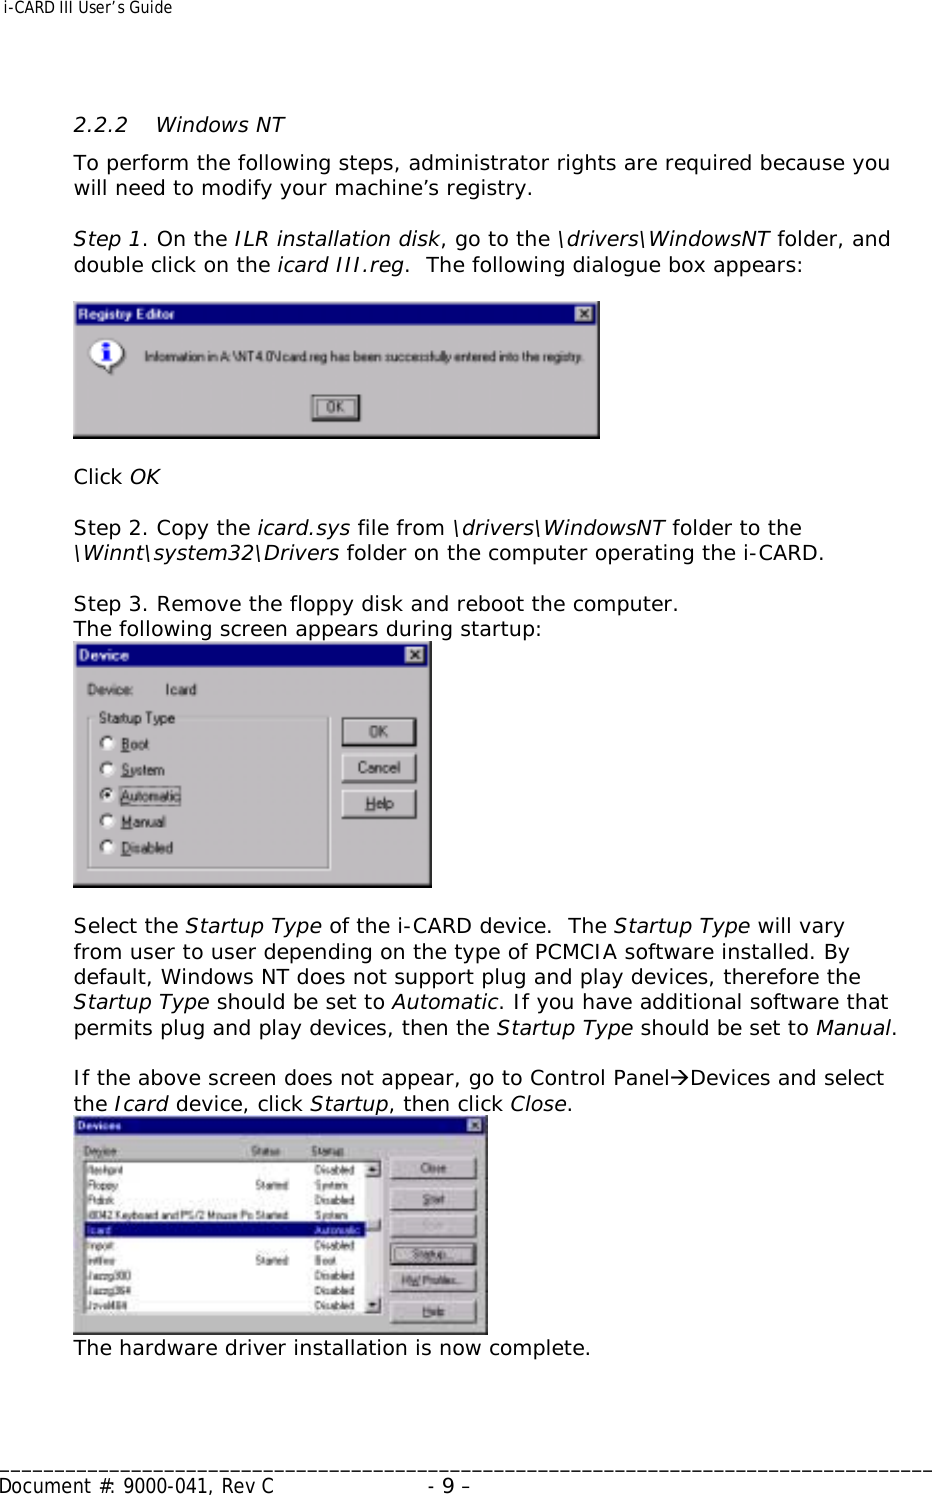  i-CARD III User’s Guide   _____________________________________________________________________________________ Document #: 9000-041, Rev C  - 9 –    2.2.2   Windows NT To perform the following steps, administrator rights are required because you will need to modify your machine’s registry.  Step 1. On the ILR installation disk, go to the \drivers\WindowsNT folder, and double click on the icard III.reg.  The following dialogue box appears:    Click OK  Step 2. Copy the icard.sys file from \drivers\WindowsNT folder to the \Winnt\system32\Drivers folder on the computer operating the i-CARD.    Step 3. Remove the floppy disk and reboot the computer. The following screen appears during startup:    Select the Startup Type of the i-CARD device.  The Startup Type will vary from user to user depending on the type of PCMCIA software installed. By default, Windows NT does not support plug and play devices, therefore the Startup Type should be set to Automatic. If you have additional software that permits plug and play devices, then the Startup Type should be set to Manual.  If the above screen does not appear, go to Control PanelÆDevices and select the Icard device, click Startup, then click Close.  The hardware driver installation is now complete.   